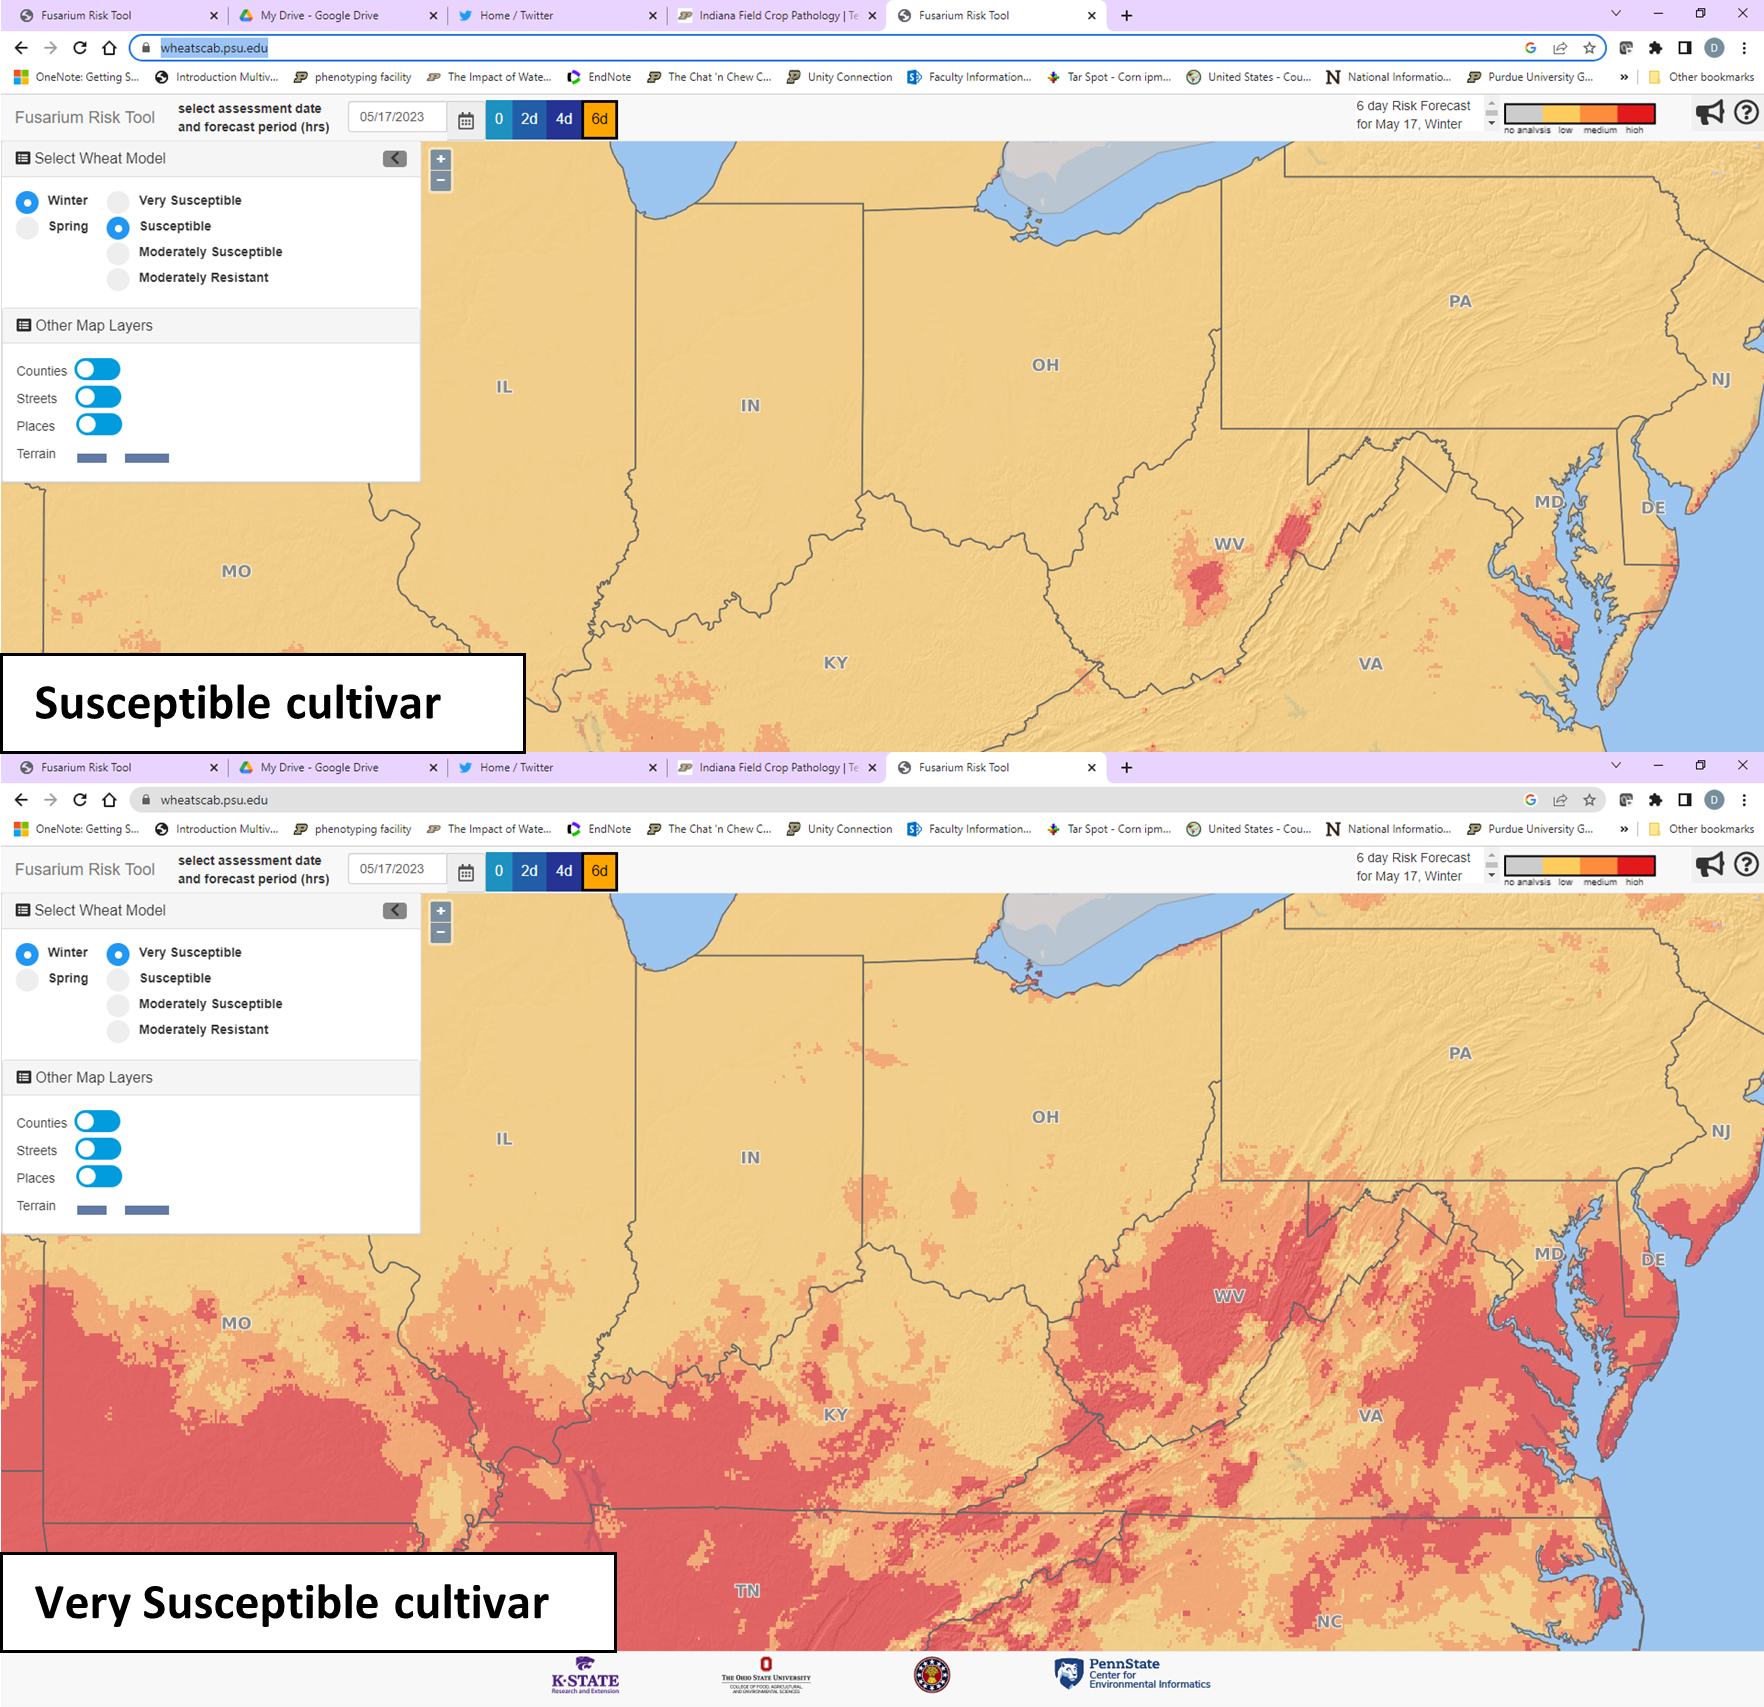 Figure 2. Fusarium Risk Assessment Tool Indiana map generated on 17 May 2023. Red = high risk, Orange= medium risk, Yellow = low risk for Fusarium head blight on wheat just prior to flowering or the early stages of grain development. (Image Credit: https://www.wheatscab.psu.edu)